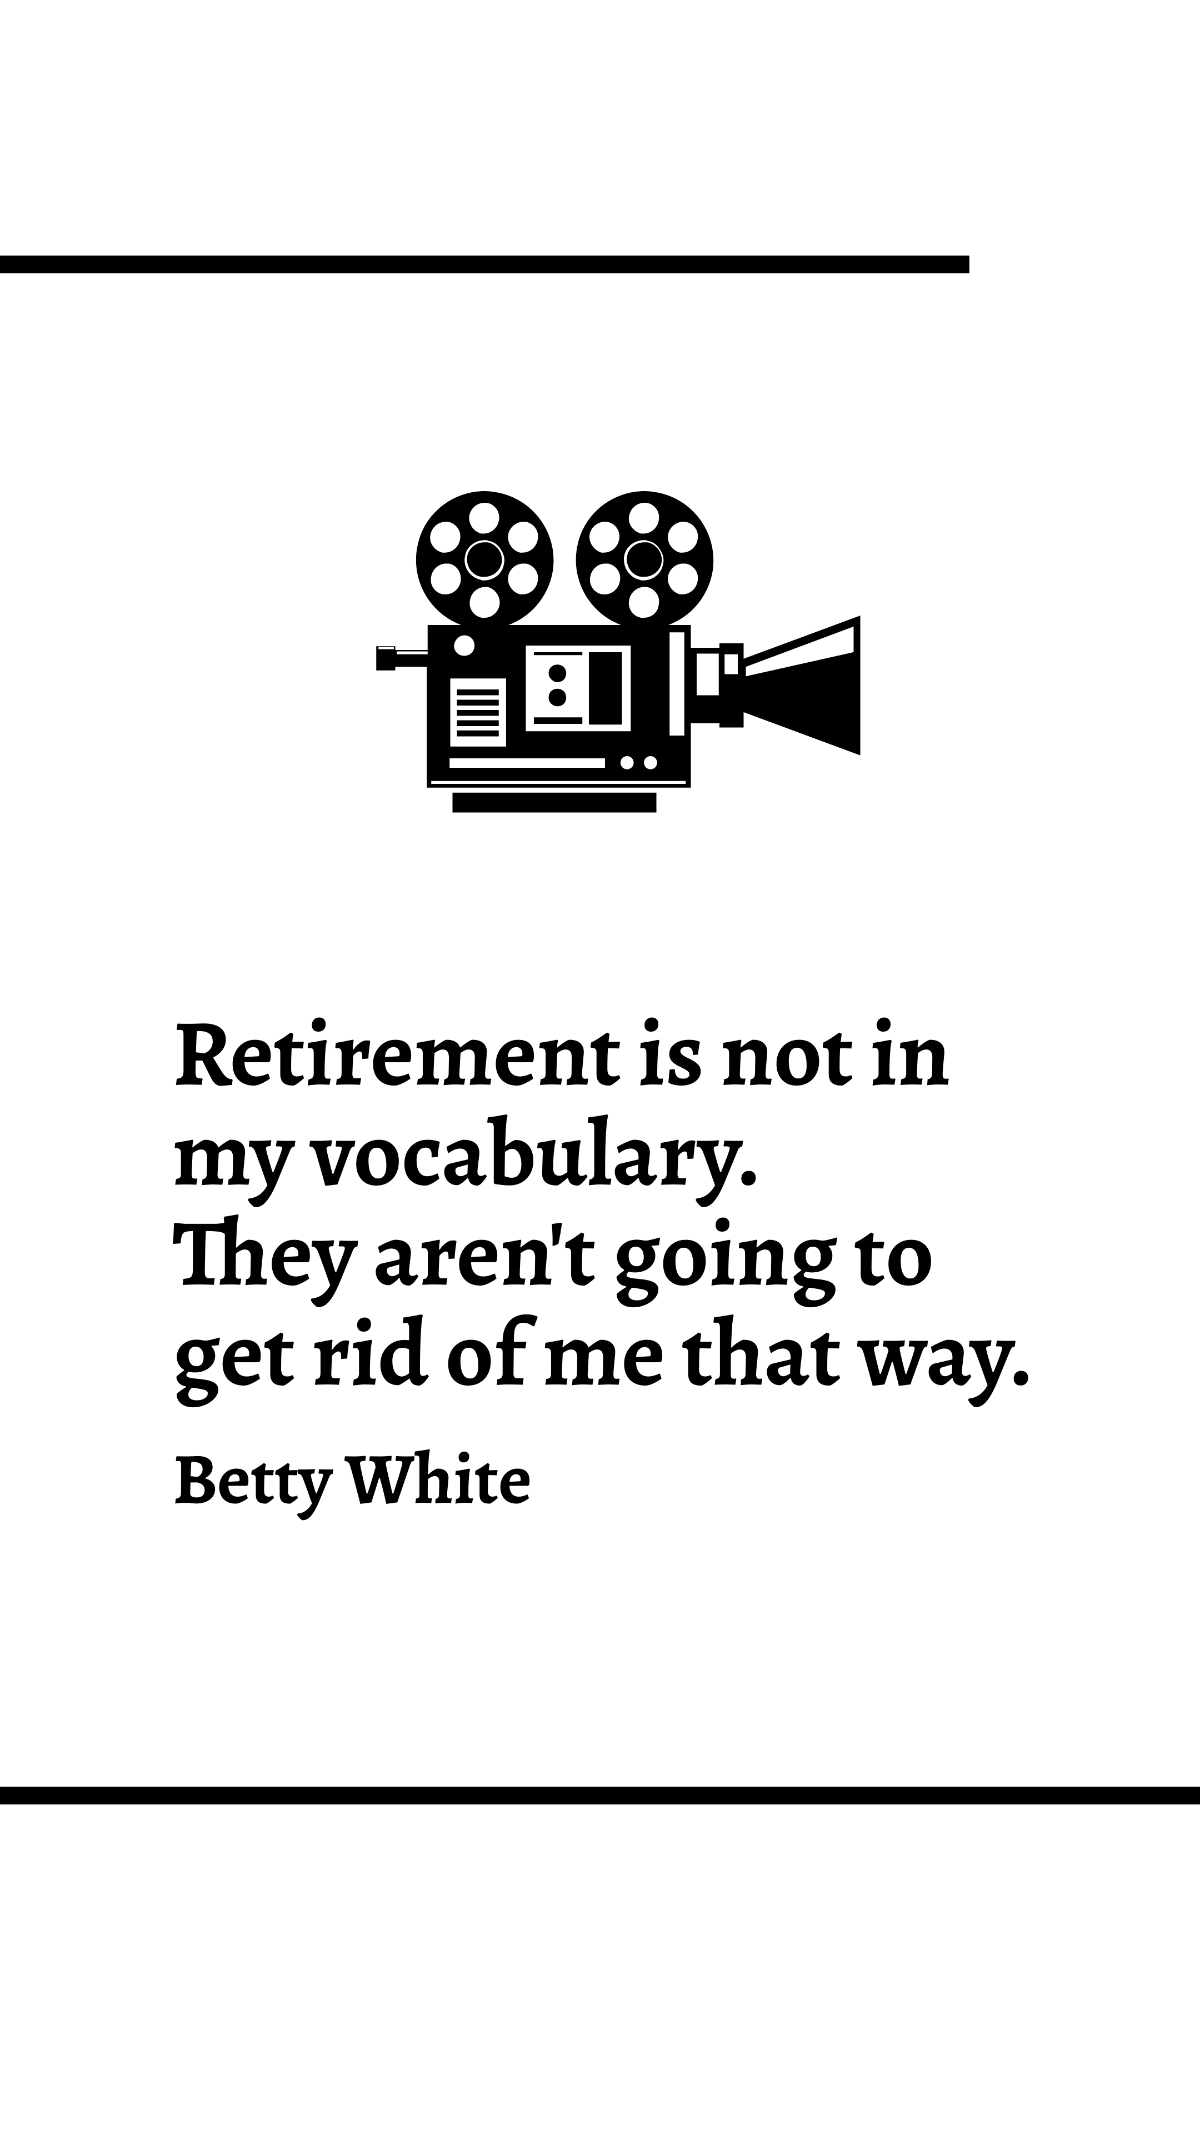 Free Betty White - Retirement is not in my vocabulary. They aren't going to get rid of me that way. Template